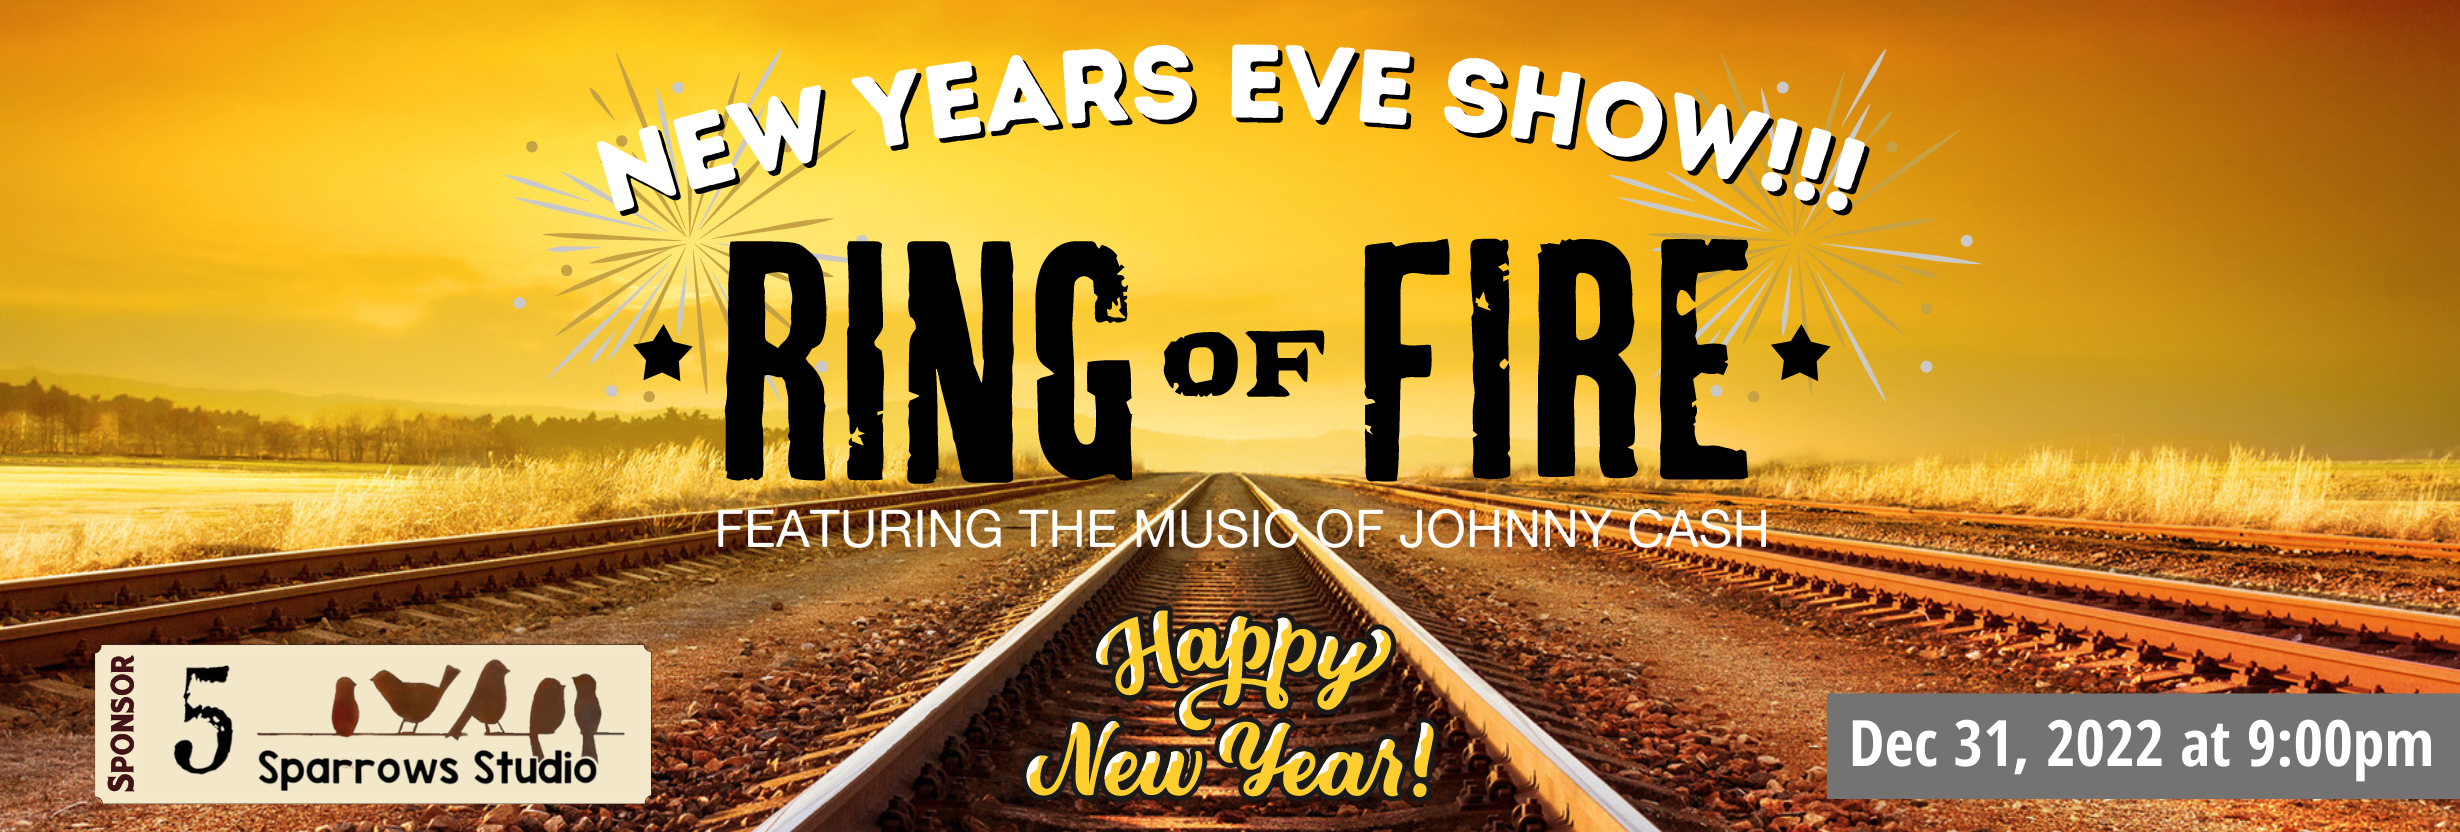 New Years Eve - Ring of Fire